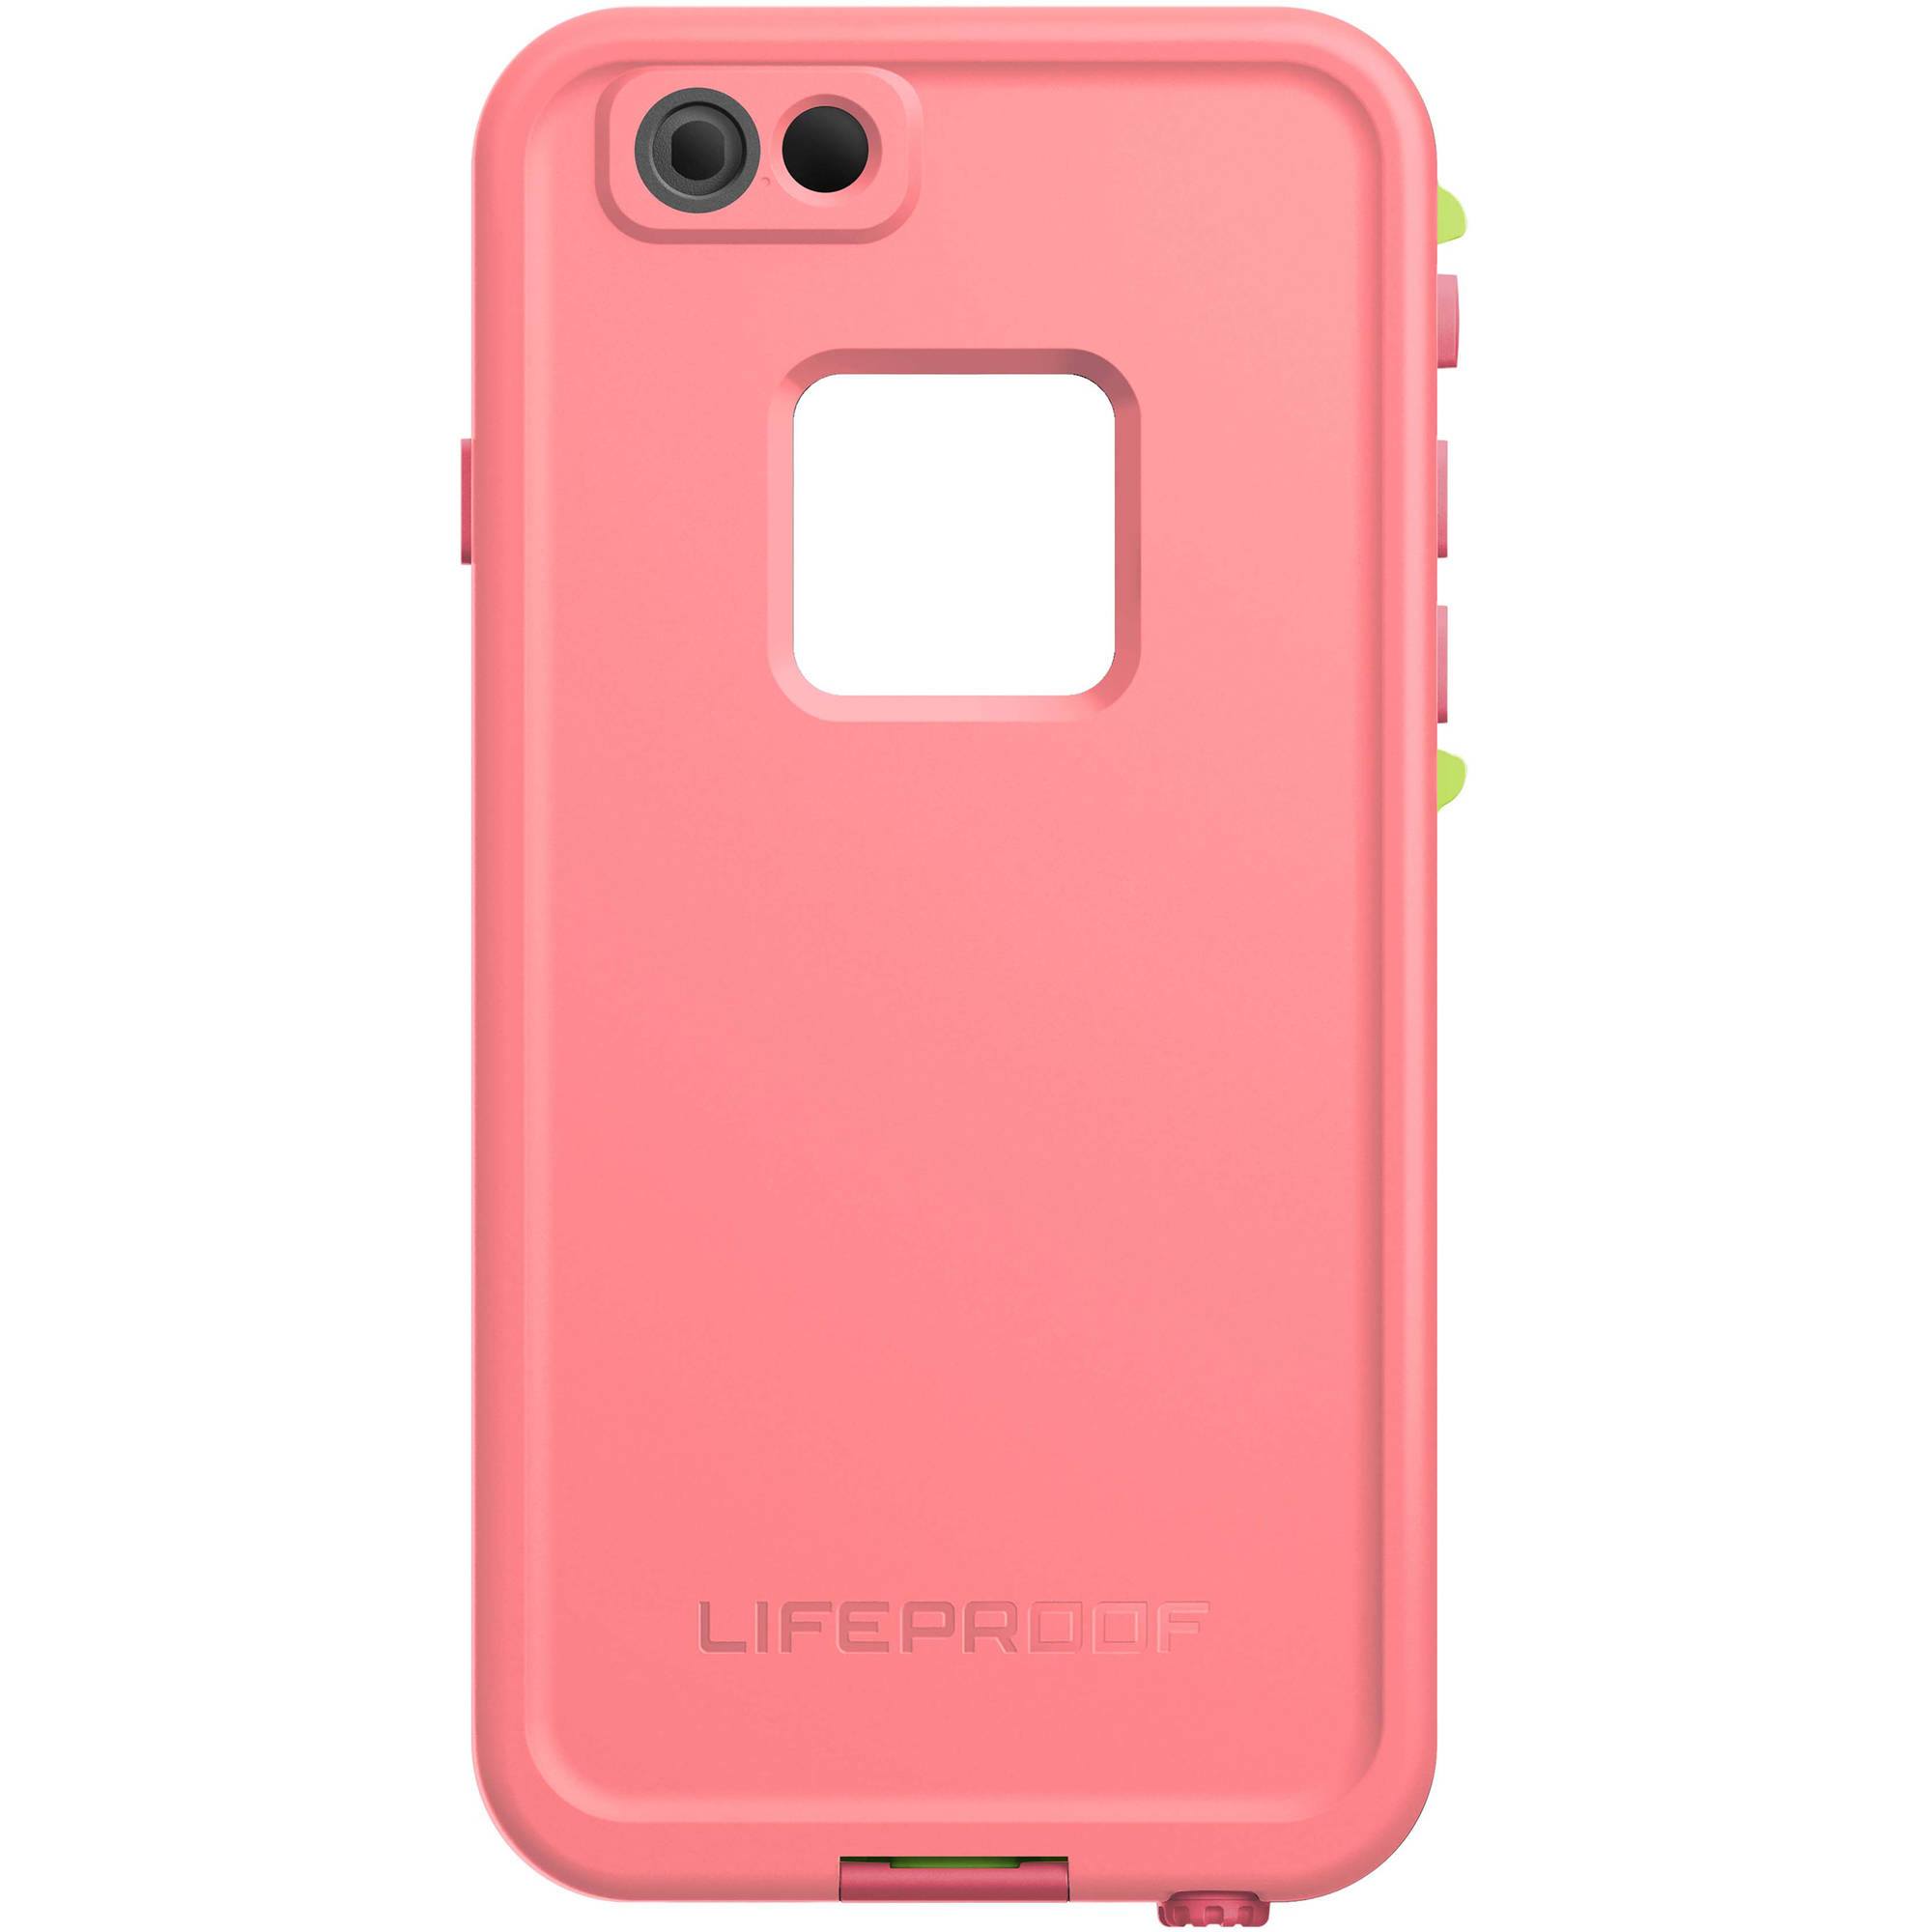 iPhone 6 plus/6s plus Lifeproof fre case, sunset pink - image 1 of 4